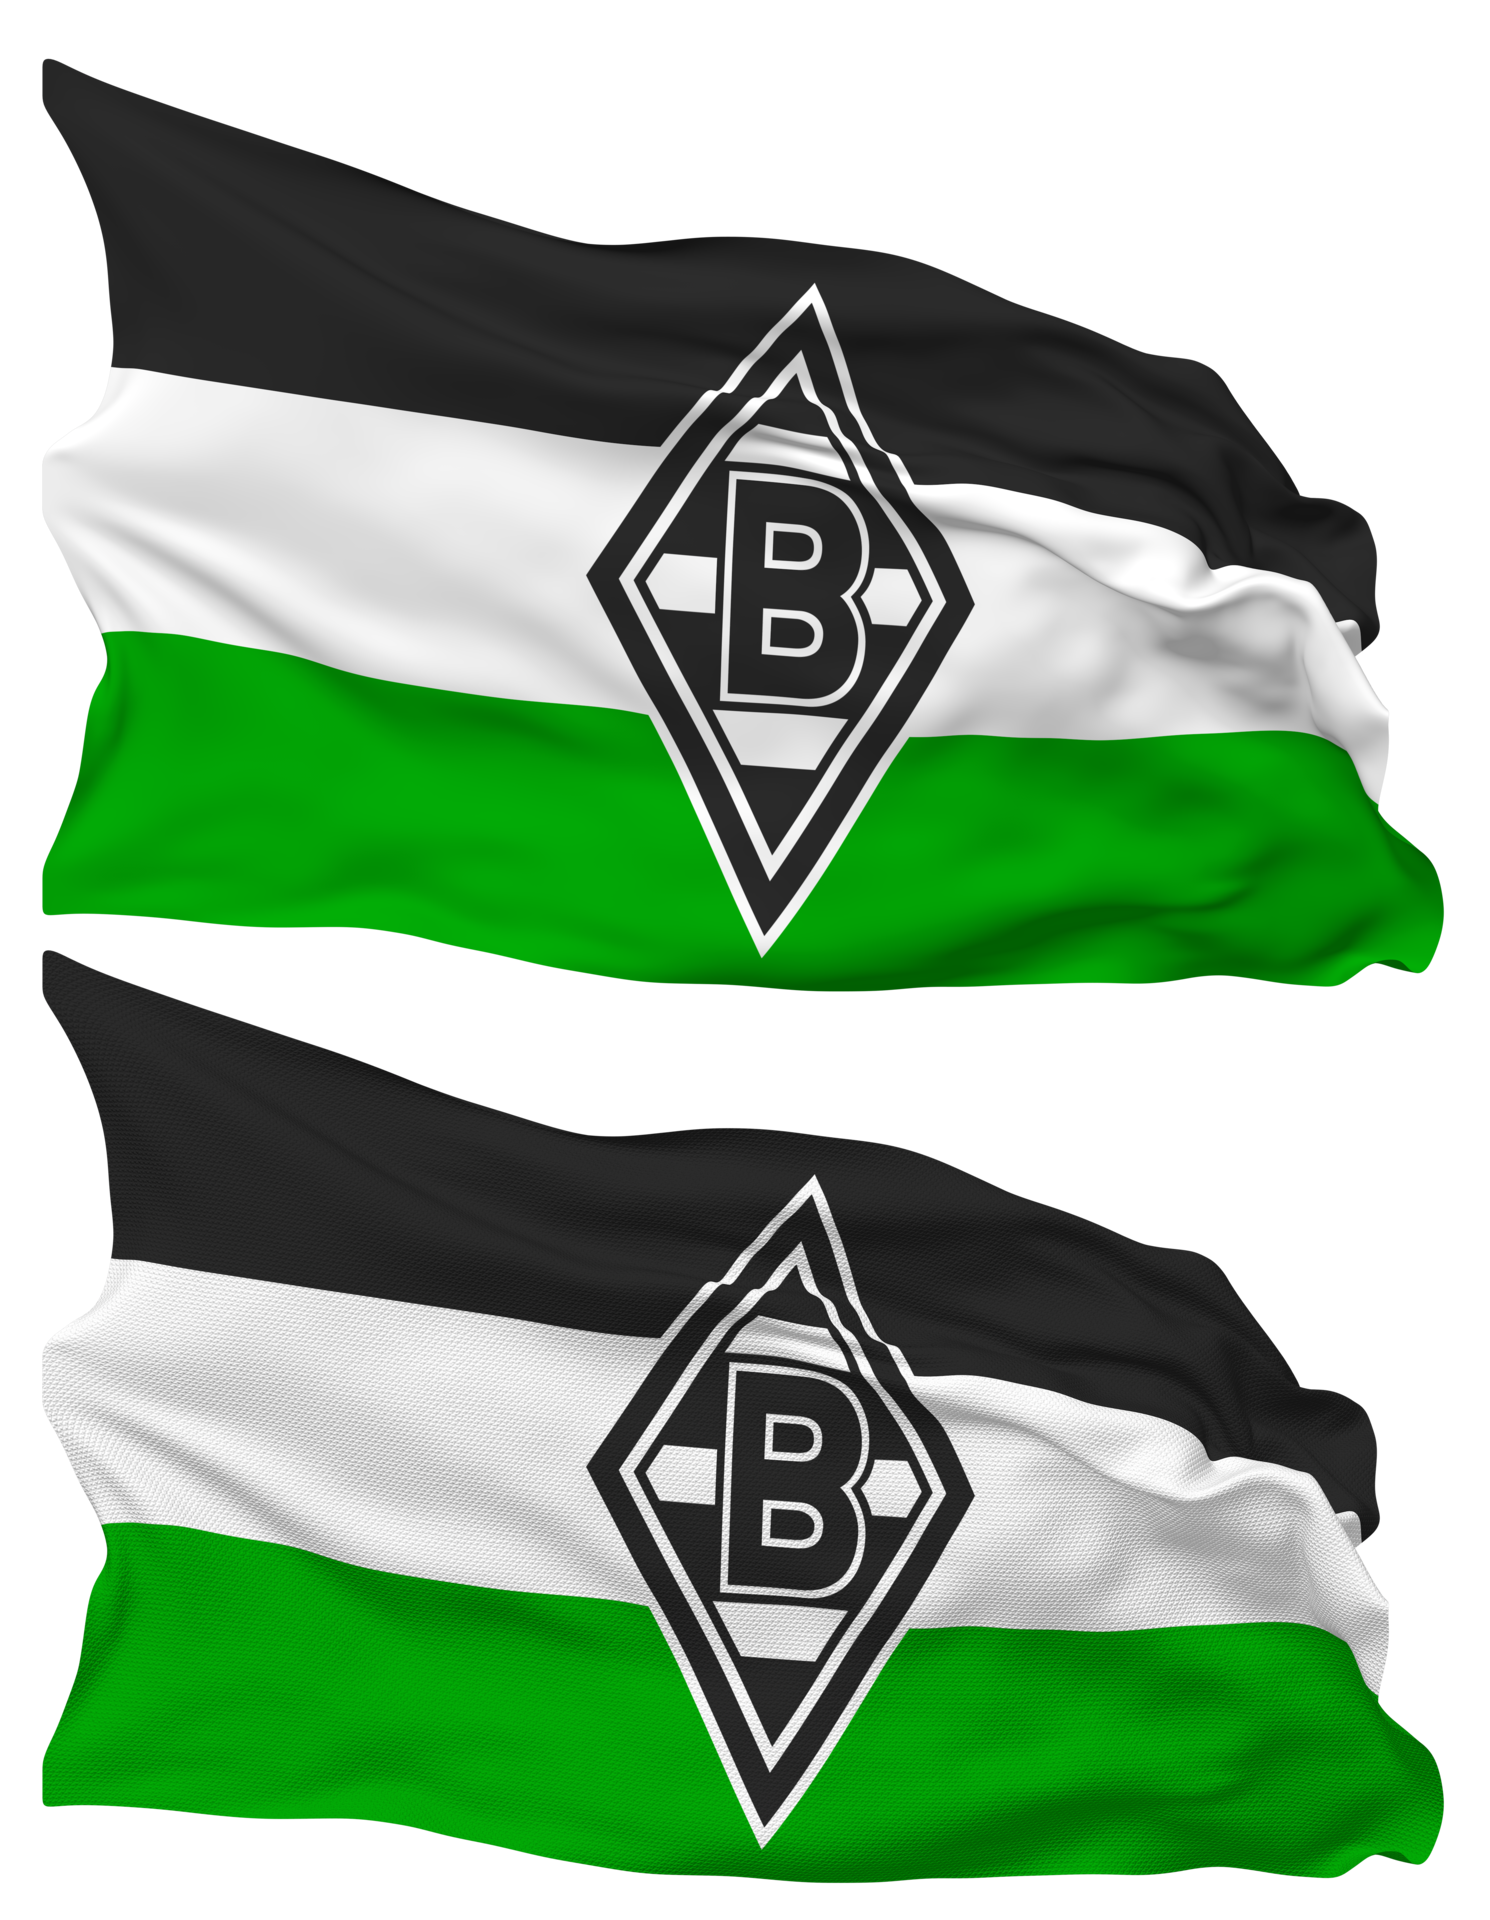  Borussia Mönchengladbach Hintergrundbild 1490x1920. Borussia Monchengladbach, Borussia MG, BMG Flag Waves Isolated in Plain and Bump Texture, with Transparent Background, 3D Rendering 23398484 PNG